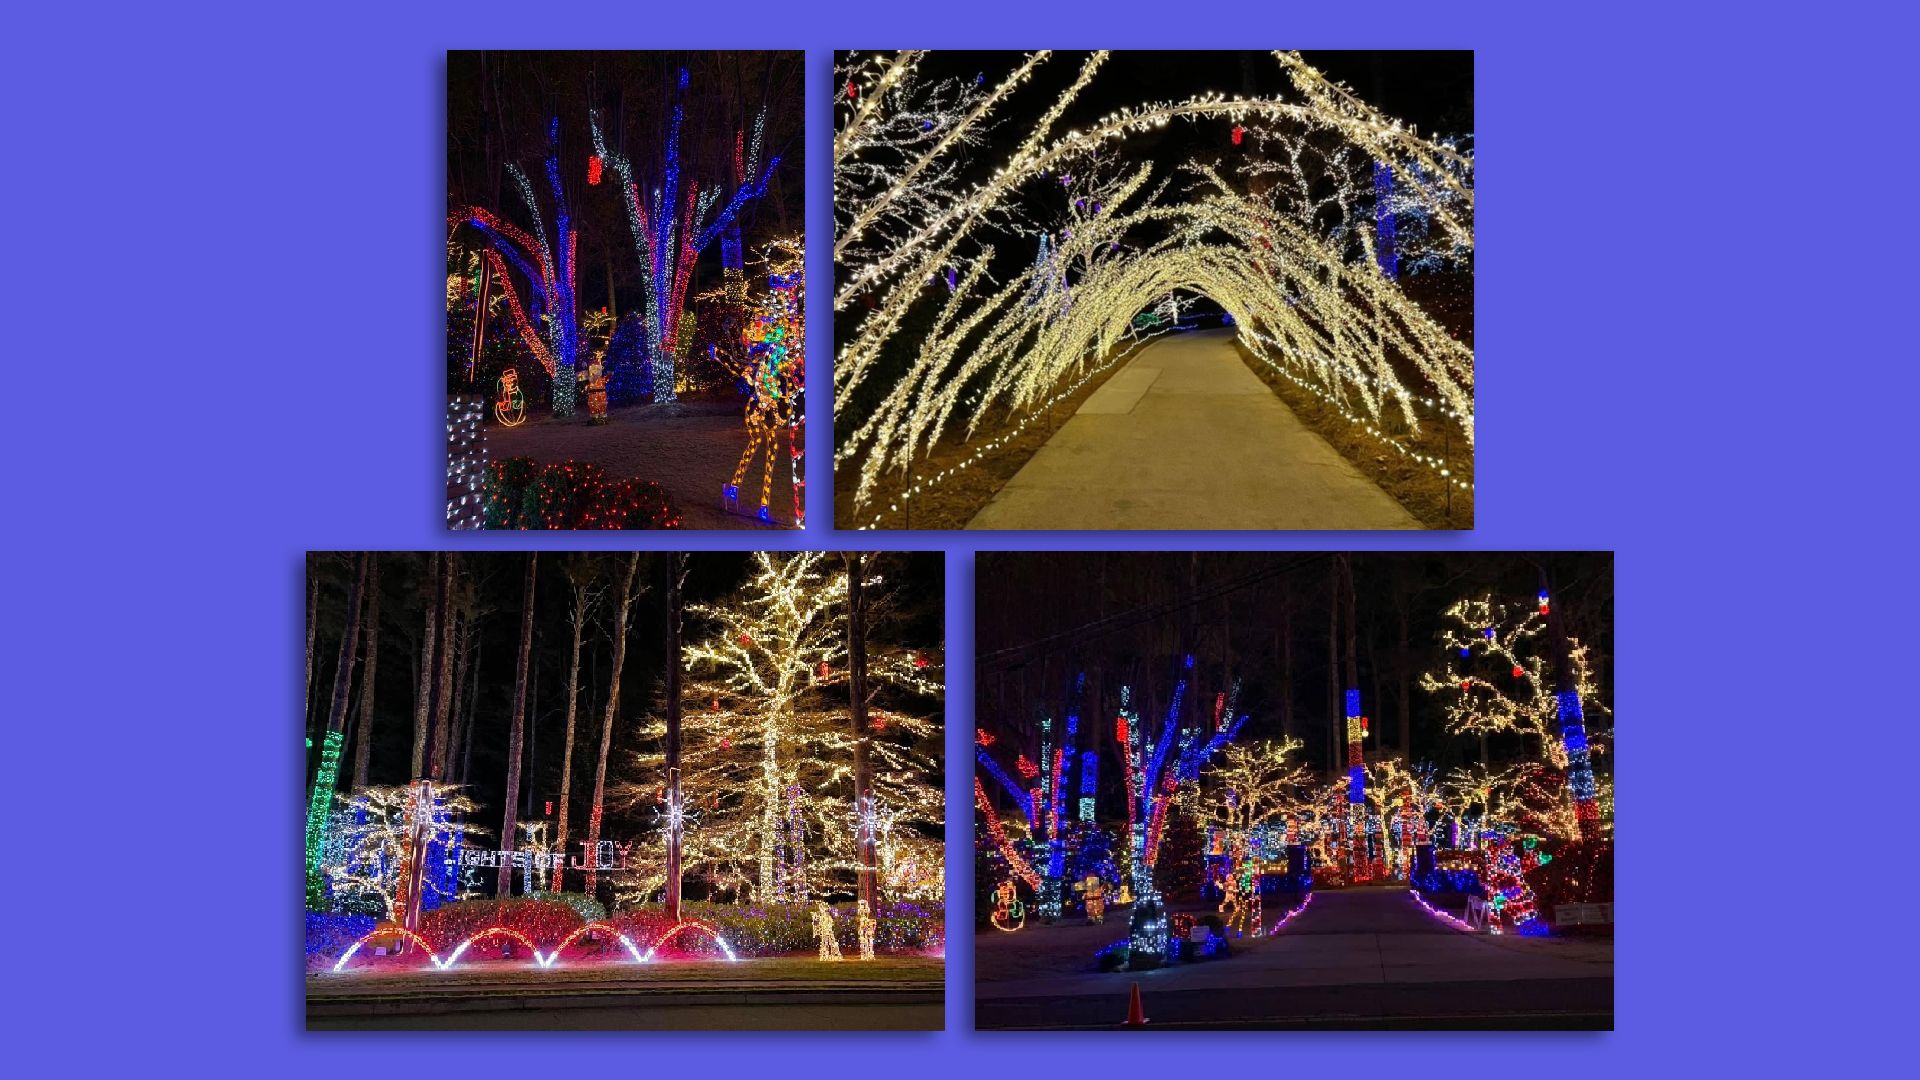 Lights of Joy pictures